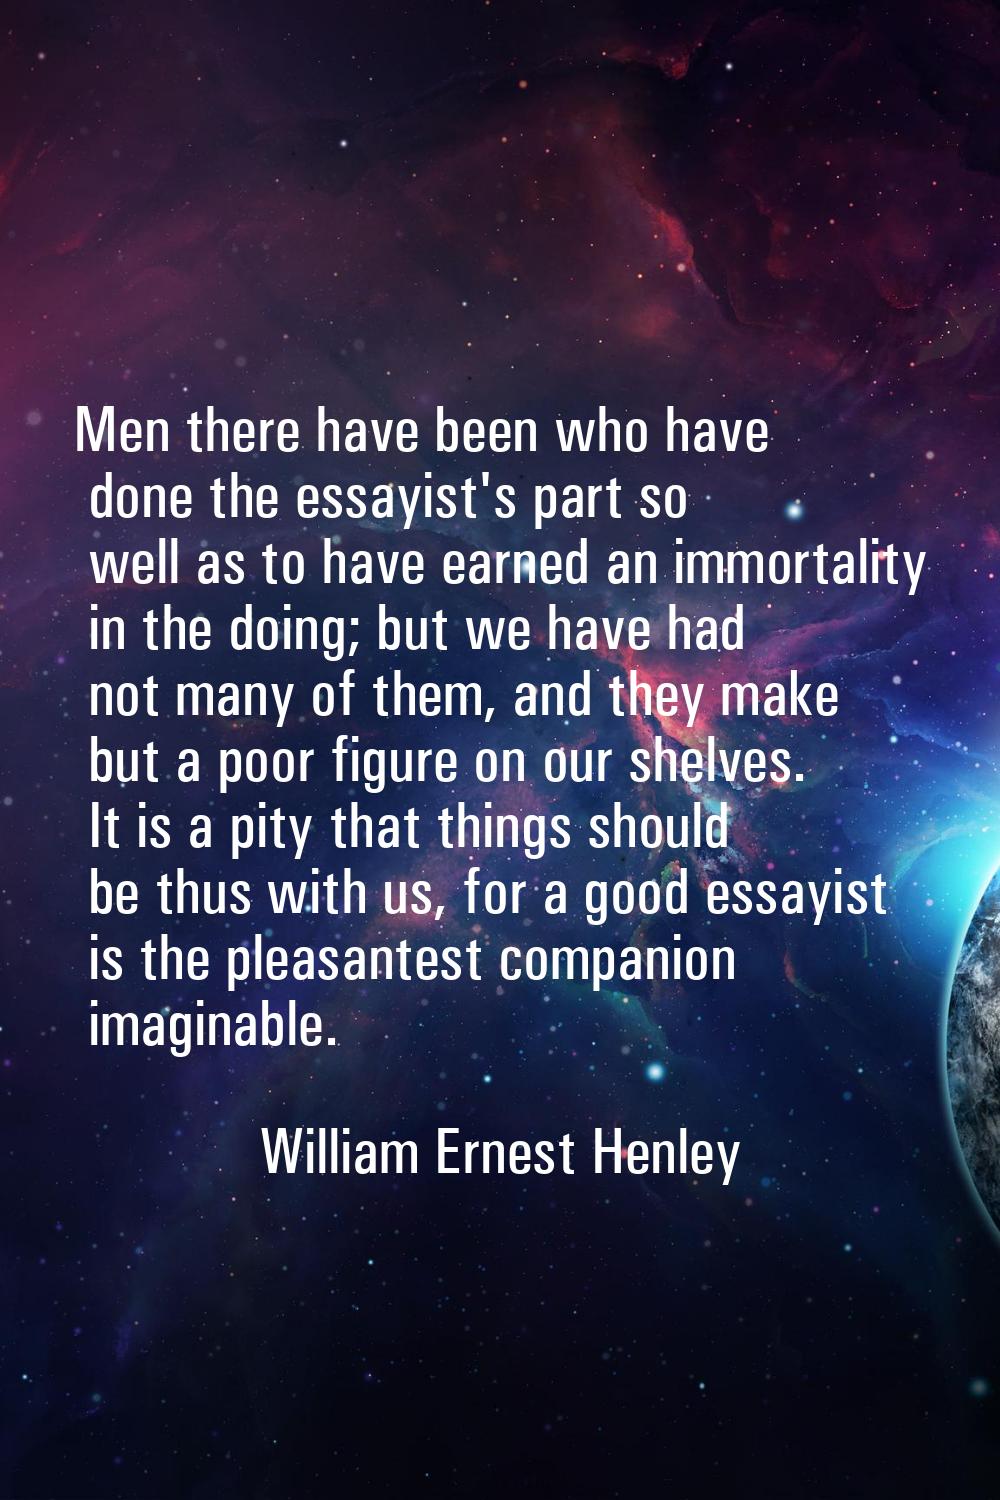 Men there have been who have done the essayist's part so well as to have earned an immortality in t